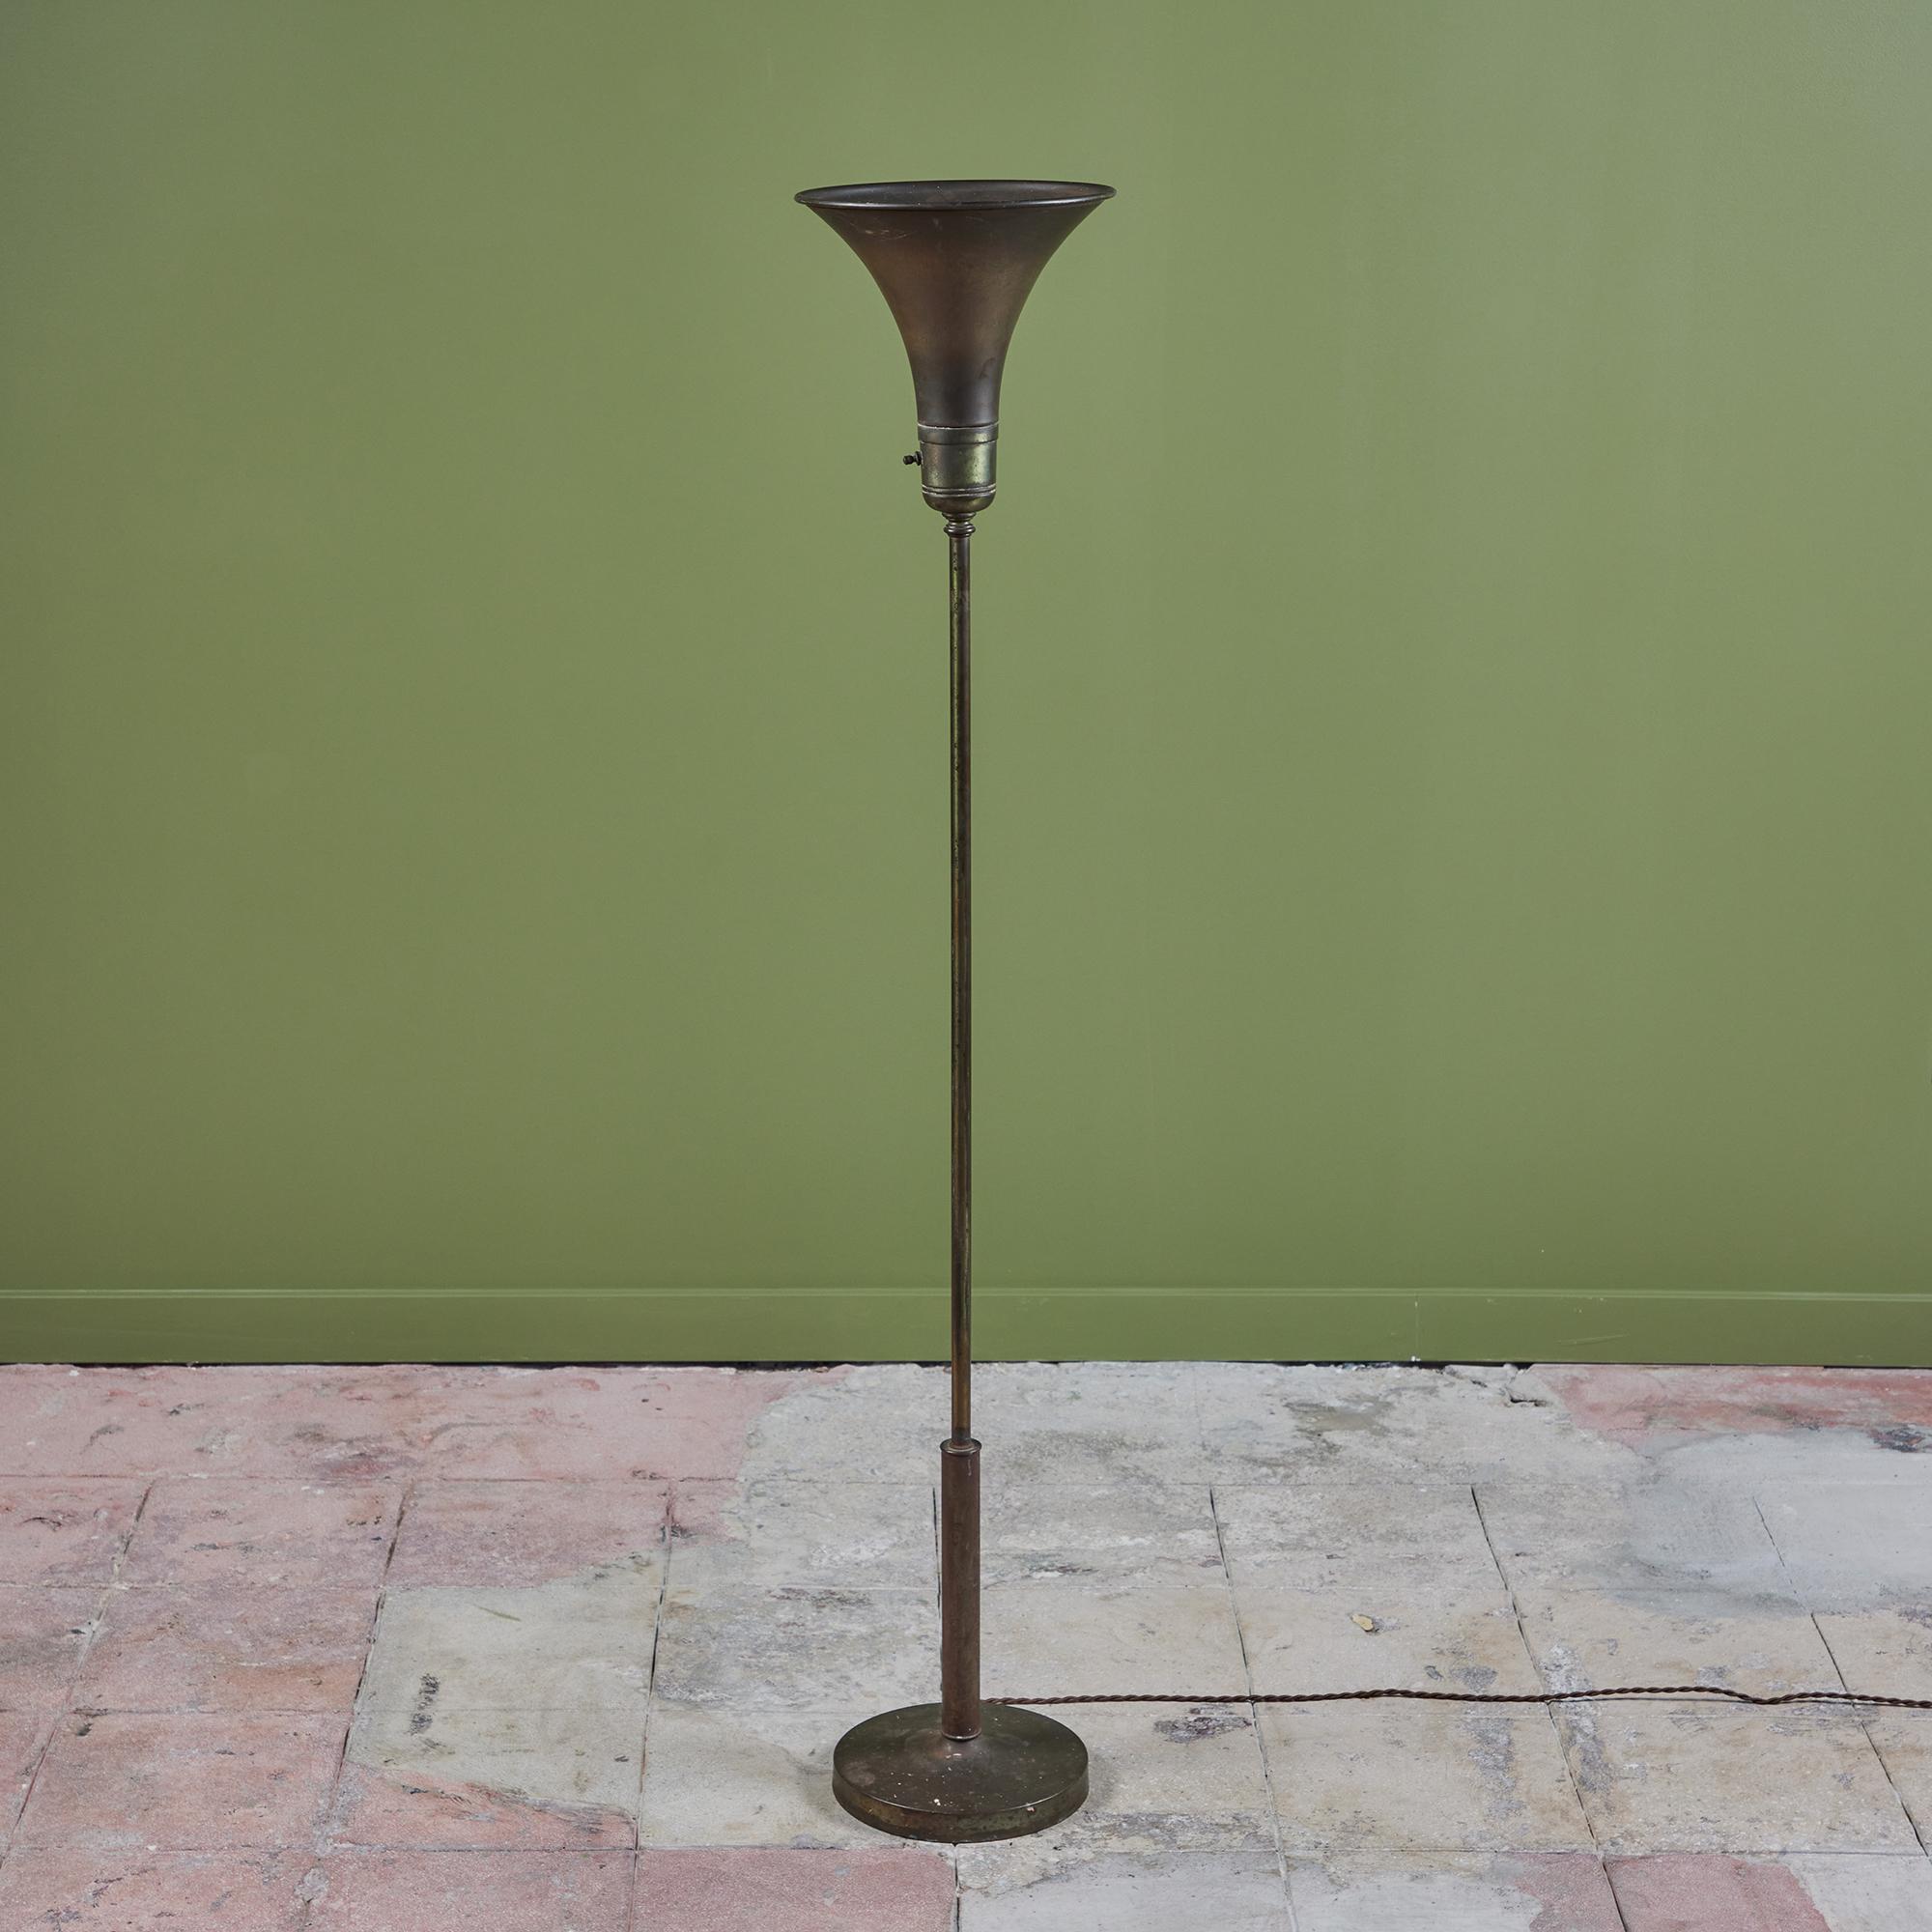 Perfectly patinated brass torchiere floor lamp features a tulip shade that directs light upwards and an on/off switch at the bottom of the shade.

Dimensions
11.75